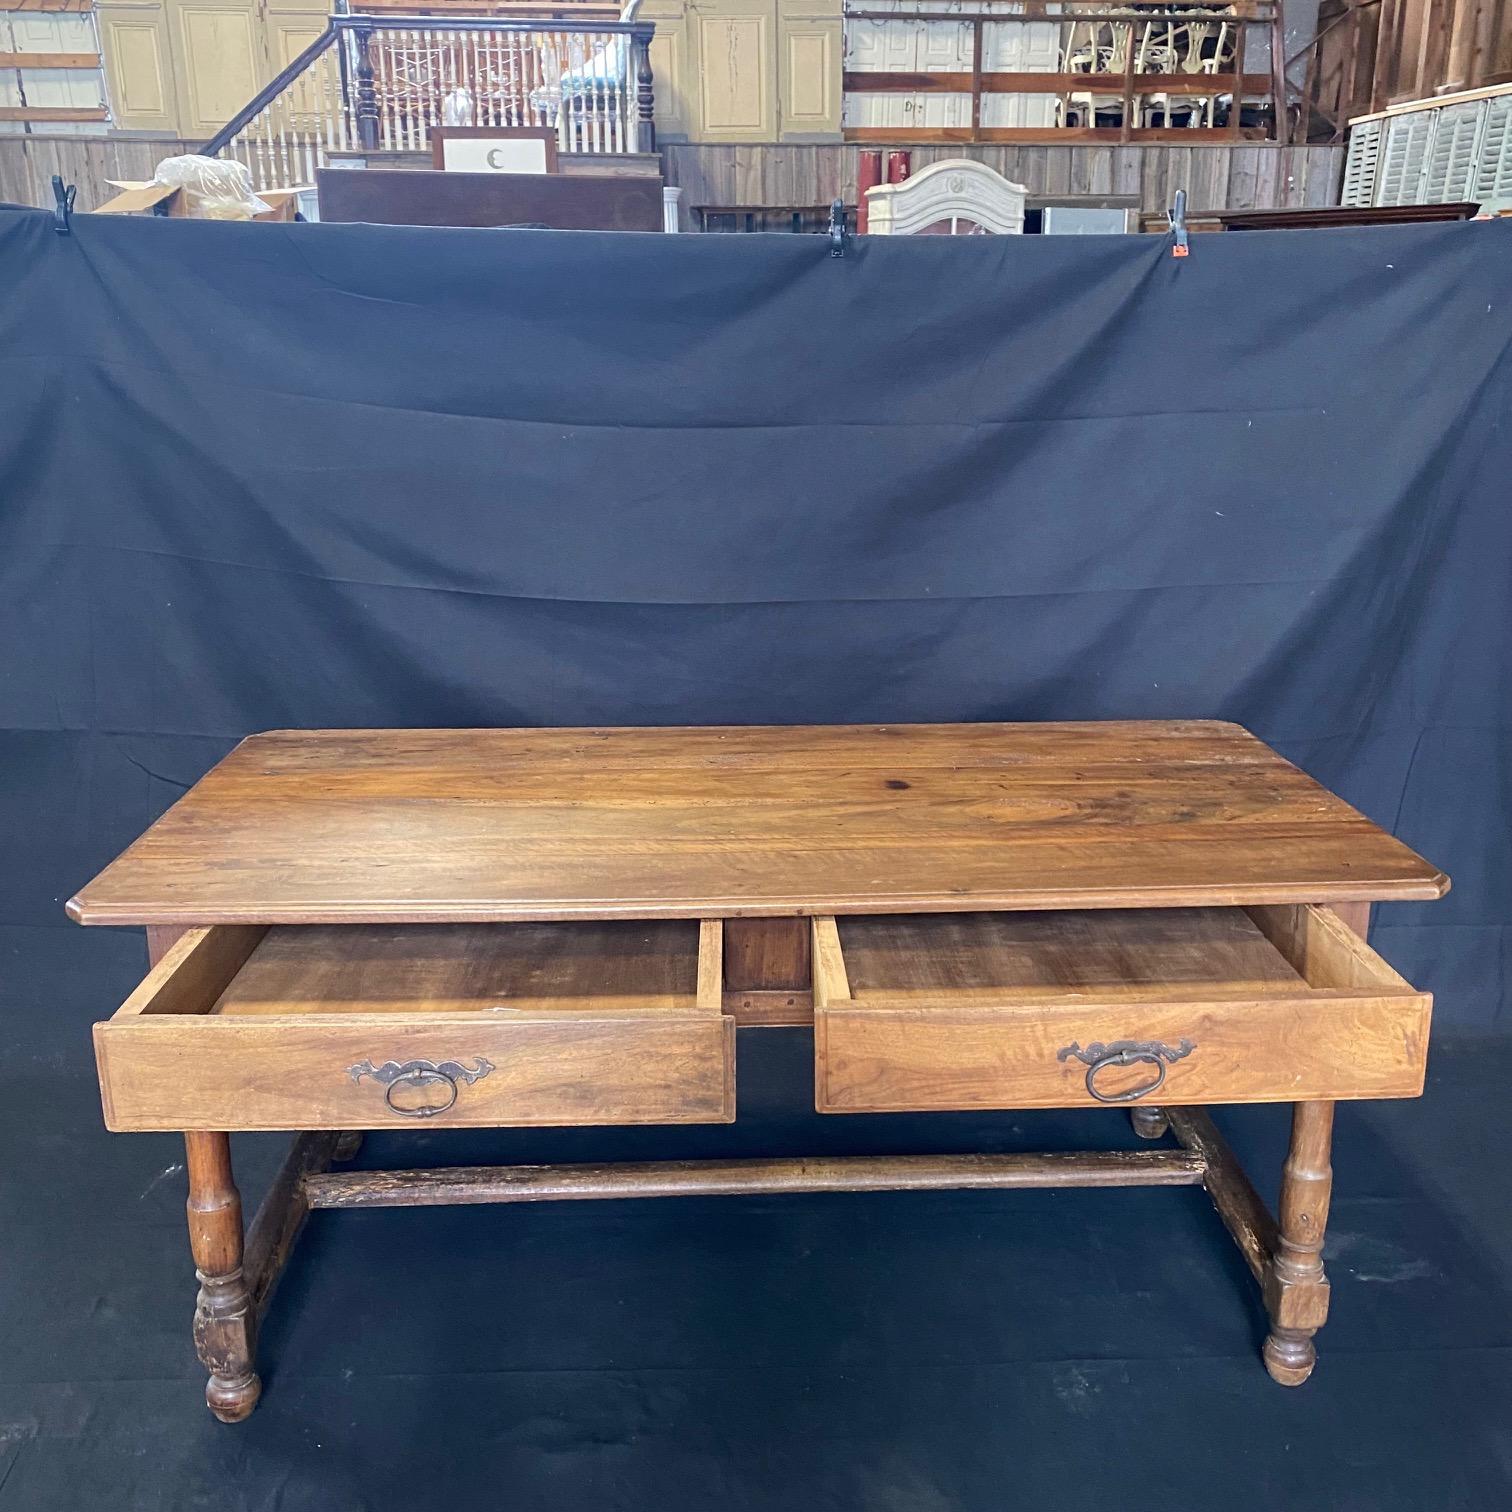 This lovely walnut late 18th century French Provincial country farmhouse dining table has two generous drawers with original pulls on the front. Stretchers are sturdy on either side of classically turned legs, and used for centuries of use in a